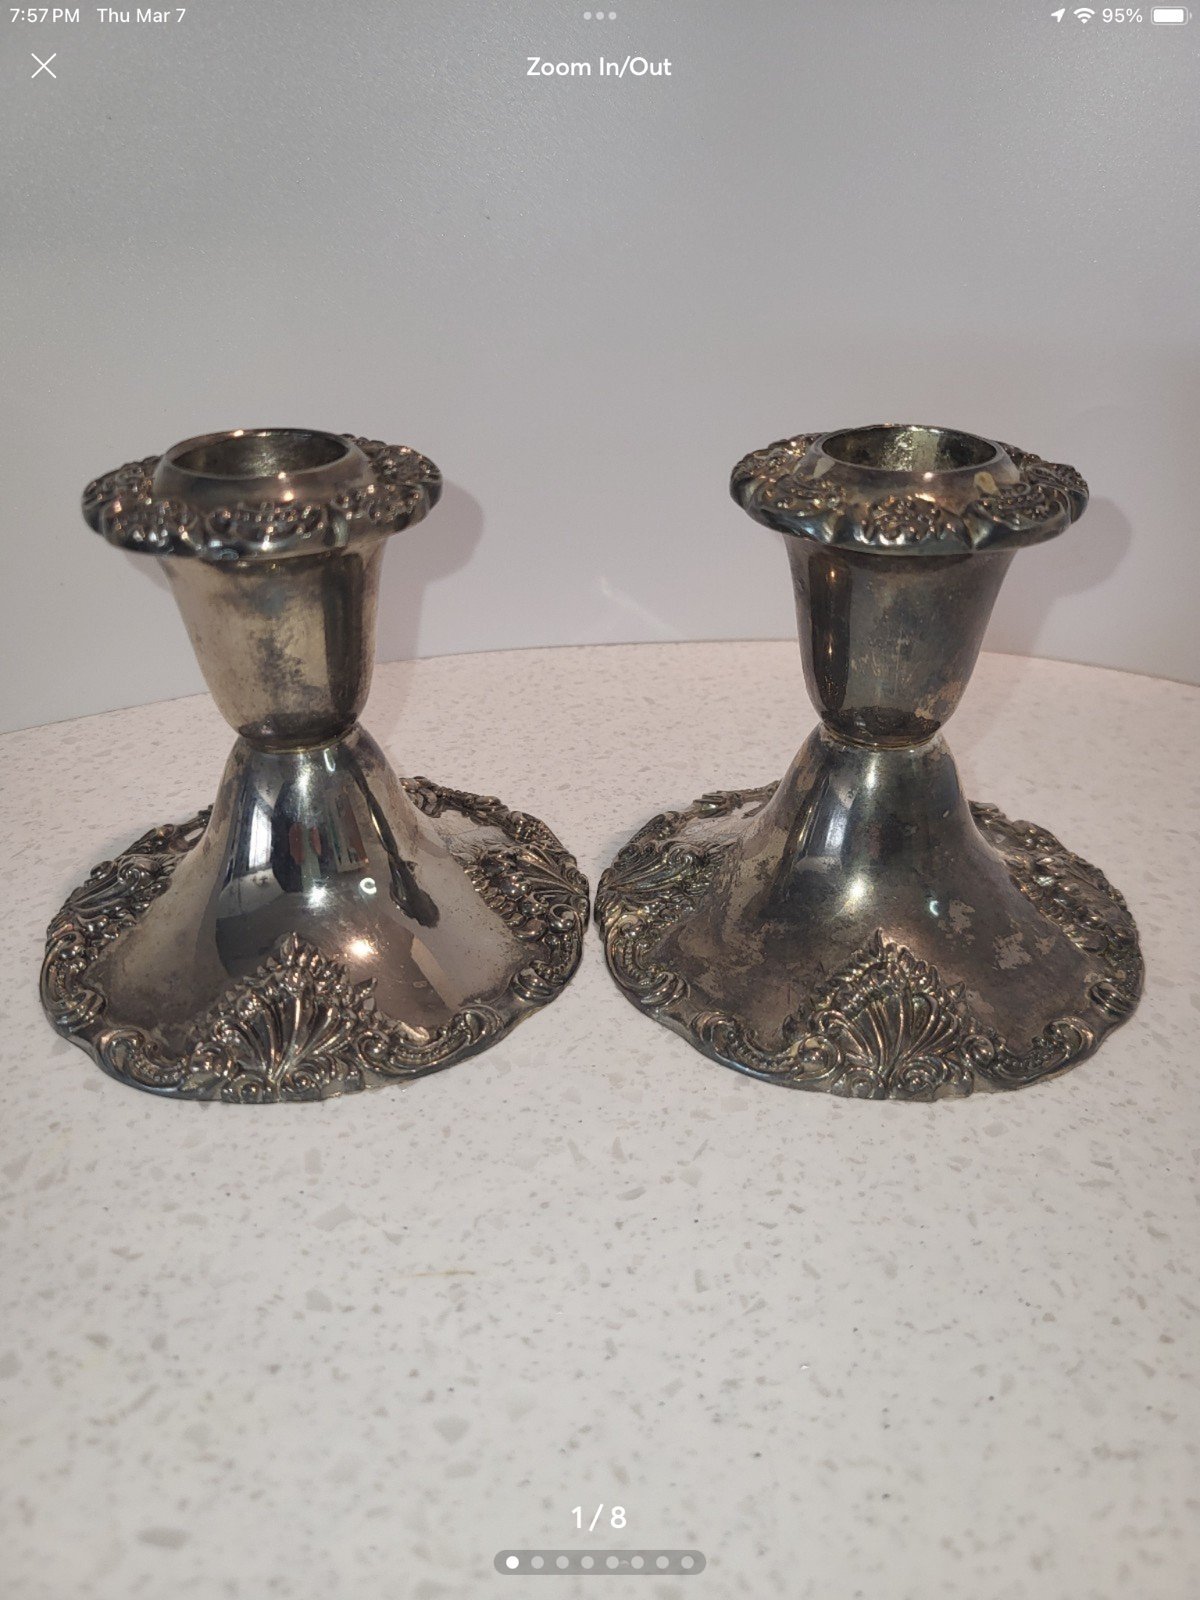 Vintage Godinger Silver Art Co silver plate candle holders (2) 8sSzNtGrY